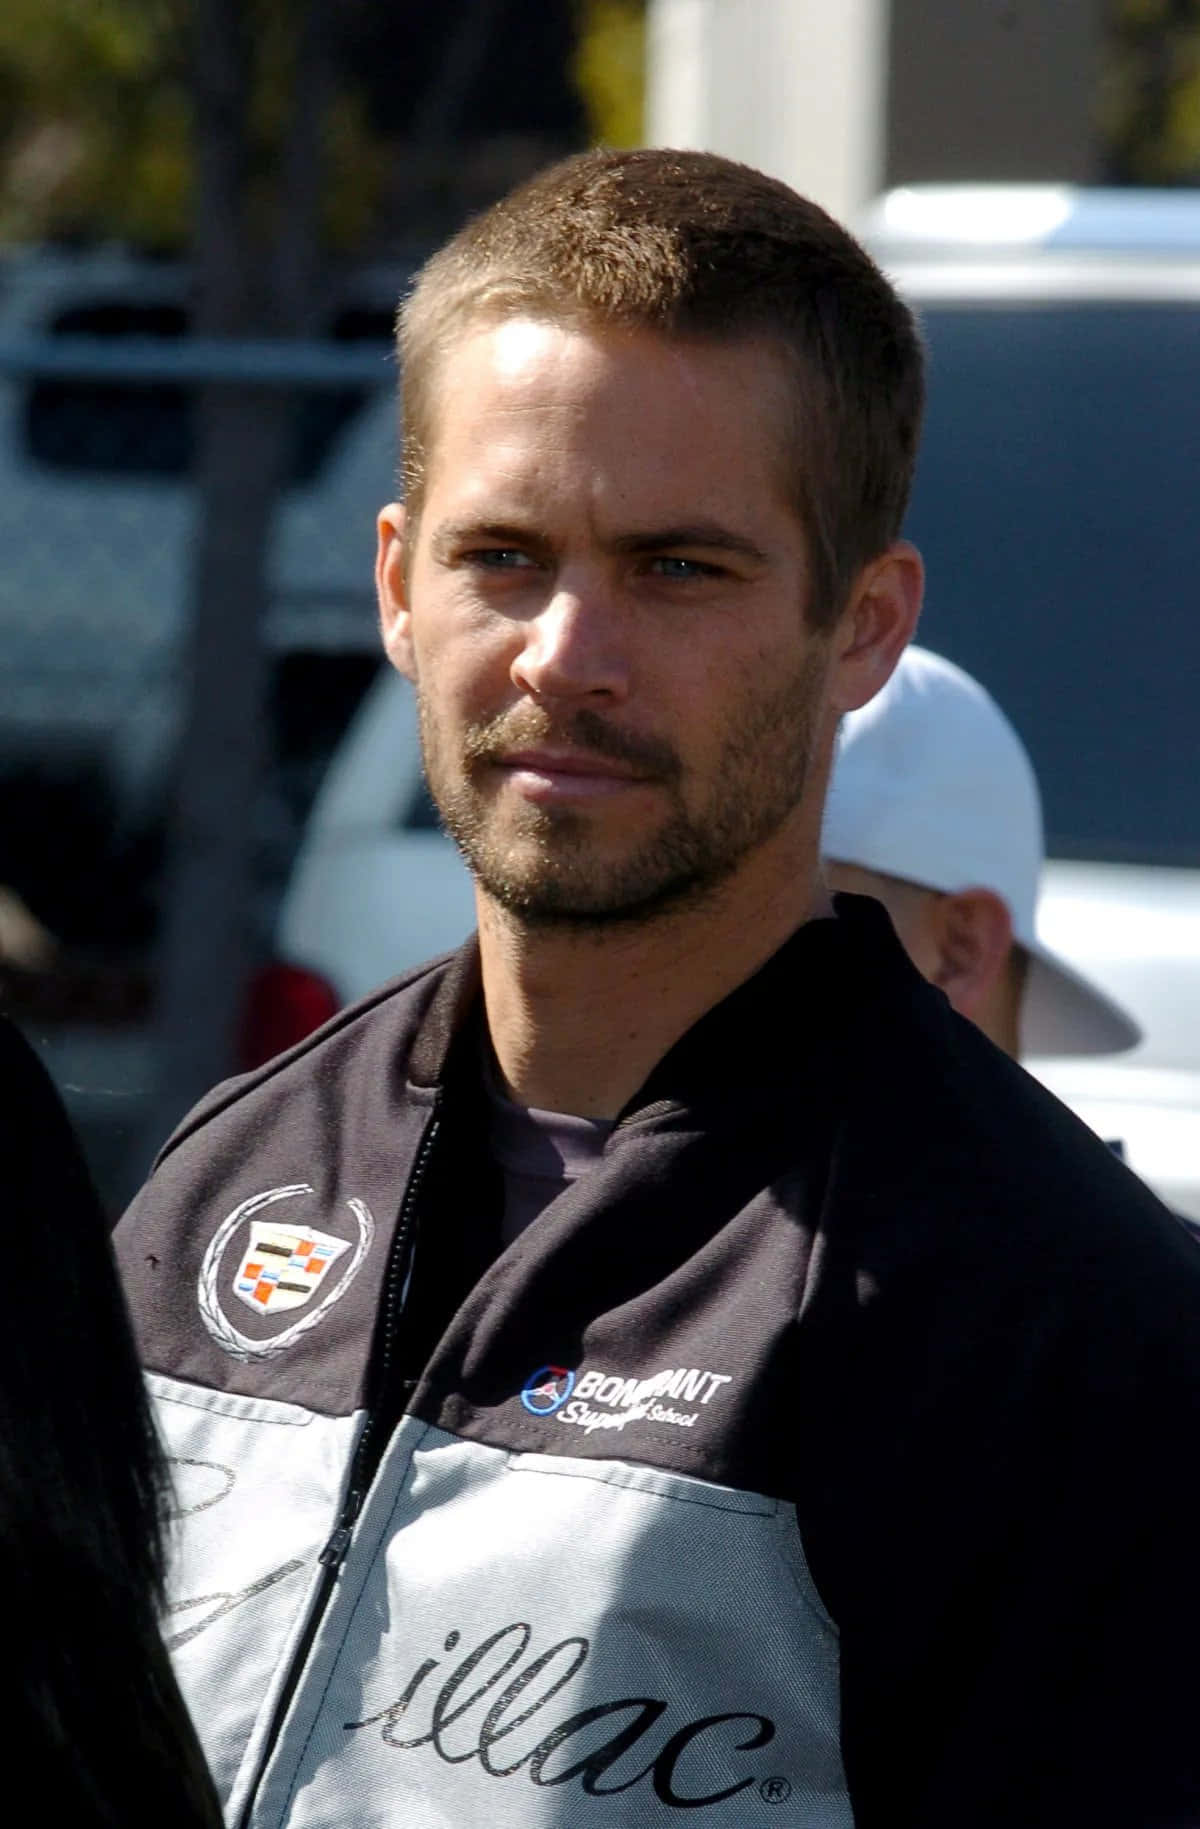 “Paul Walker in one of his iconic roles”